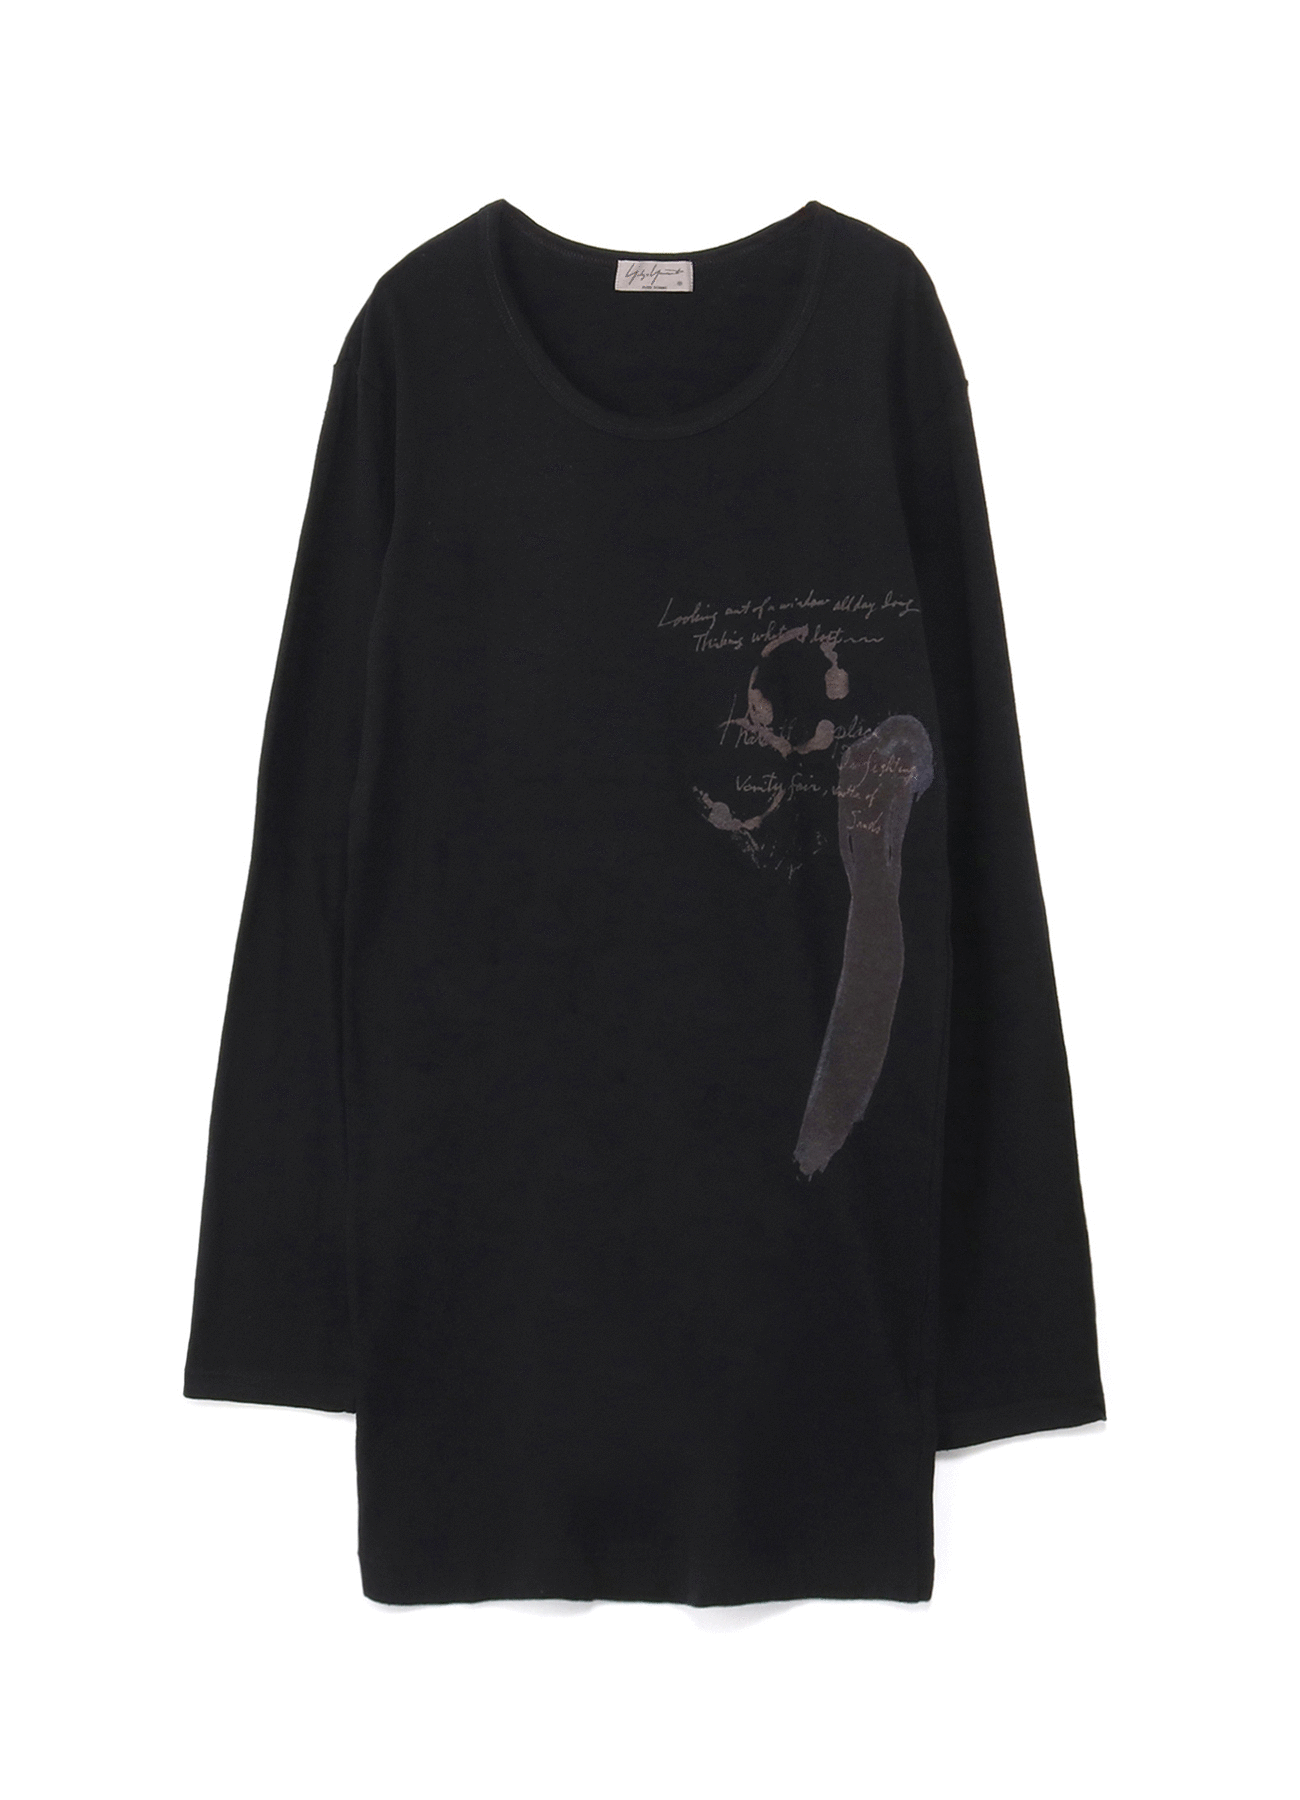 Yohji Yamamoto POUR HOMME Vintage ｜ [Official Mail Order] THE 